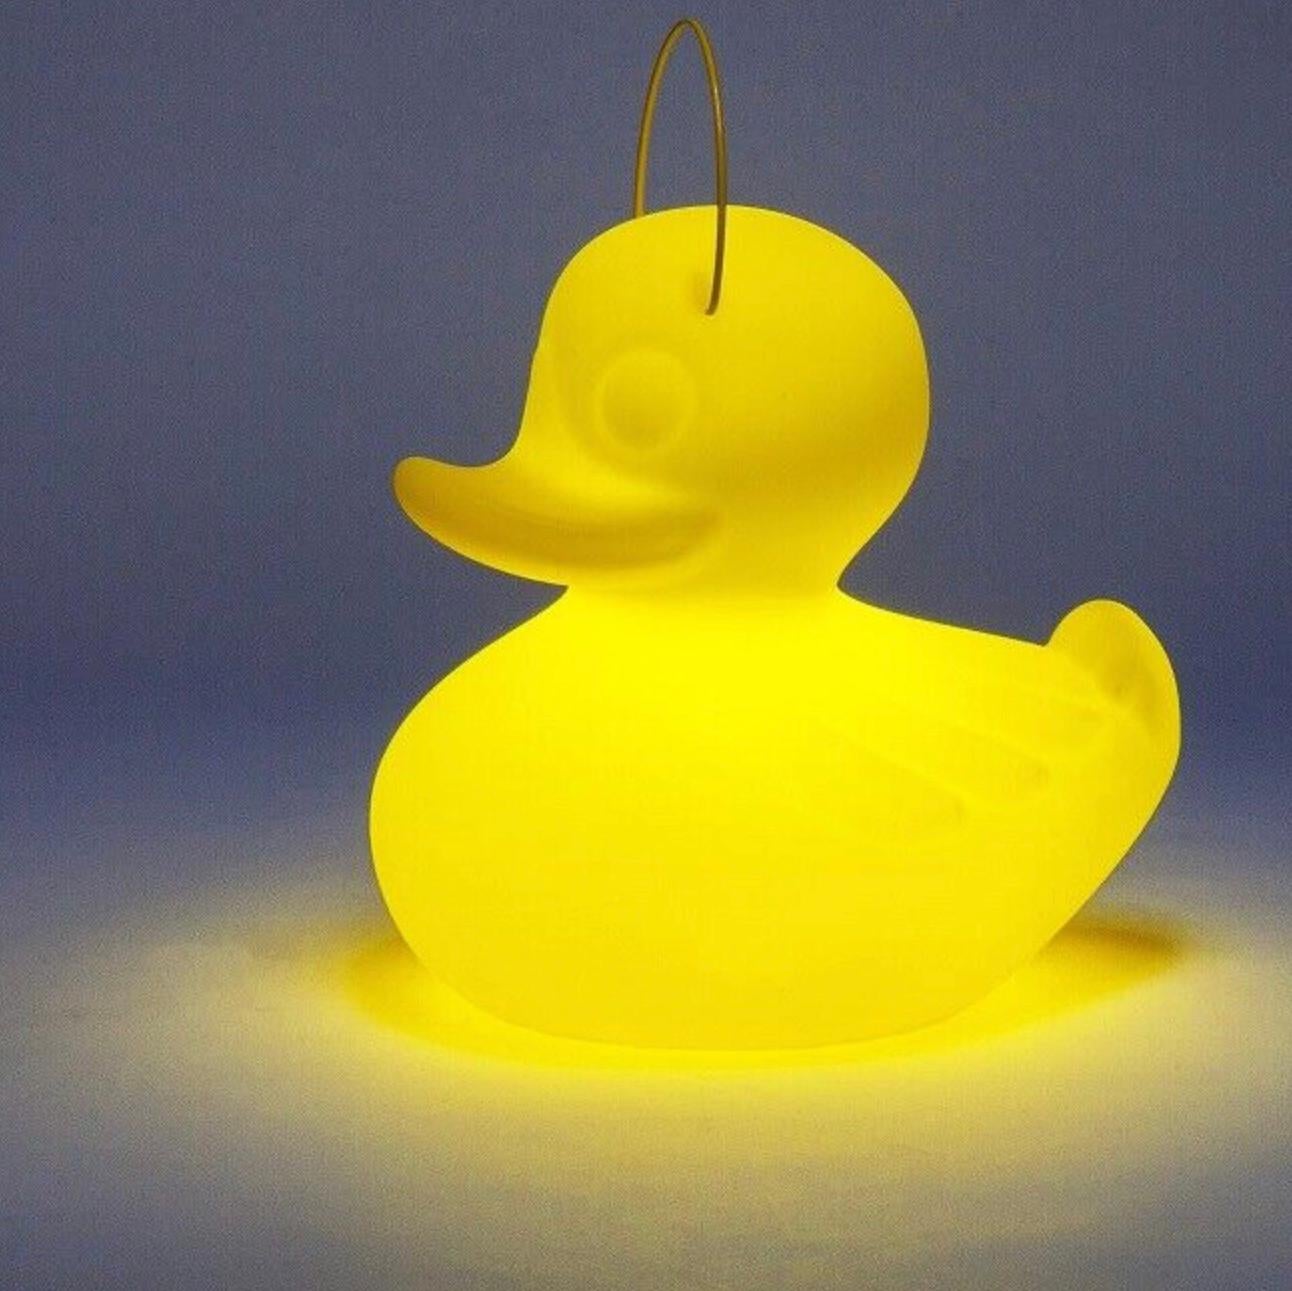 The original Duck Duck Lamp (XL)™ floats on water and is designed to move around. Its cordless rechargeable battery allows it to be transported from its charging dock to any place desired. Welcomed onboard private yachts and speed boats, found